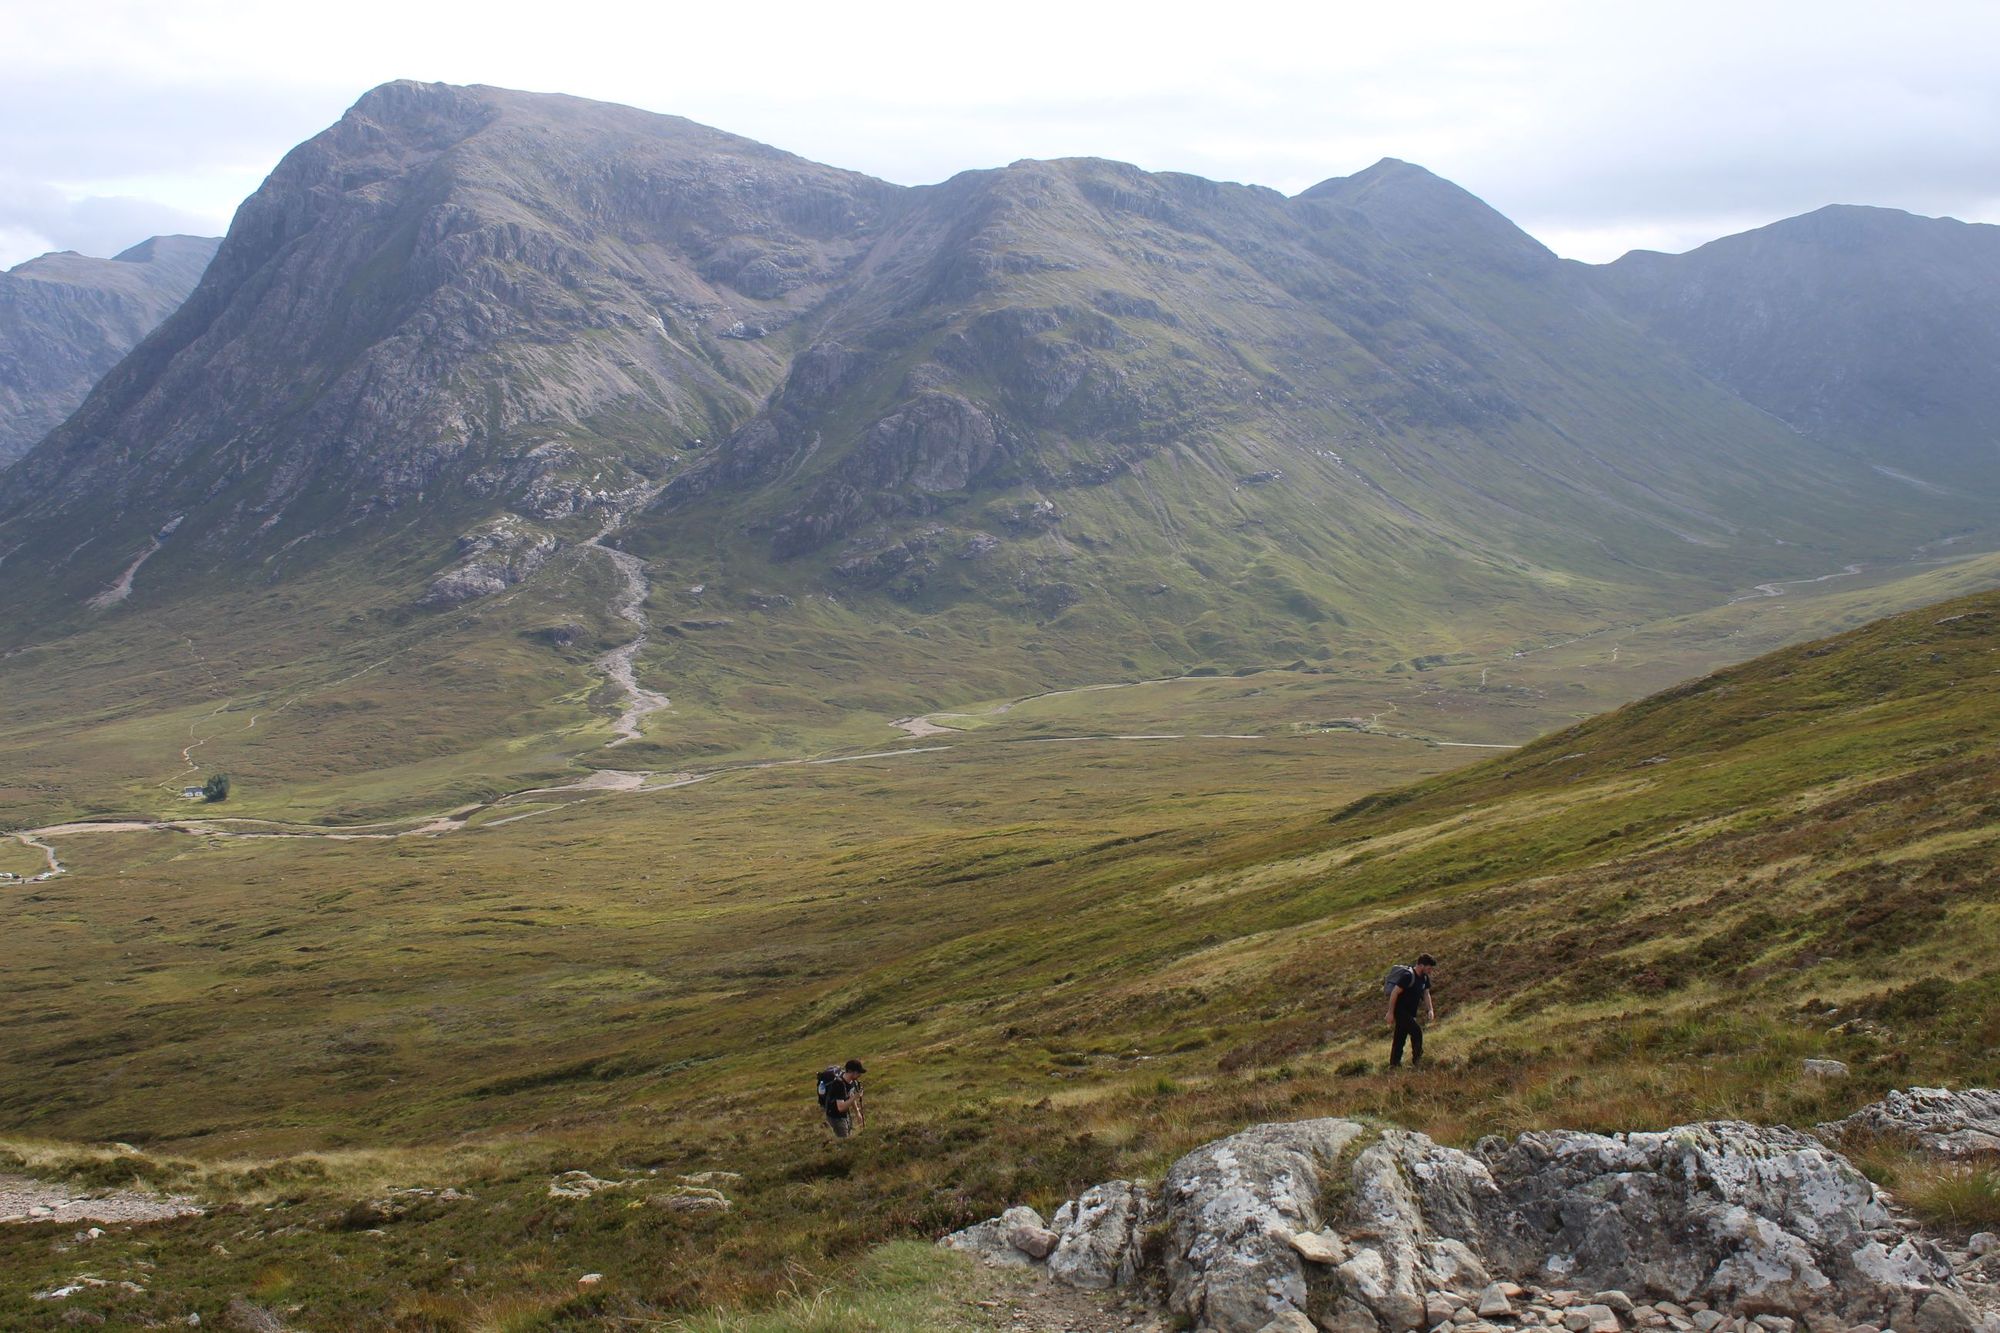 Hiking up the Devil's Staircase on day six of the West Highland Way, with views over Glencoe and Buachaille Etive Mòr